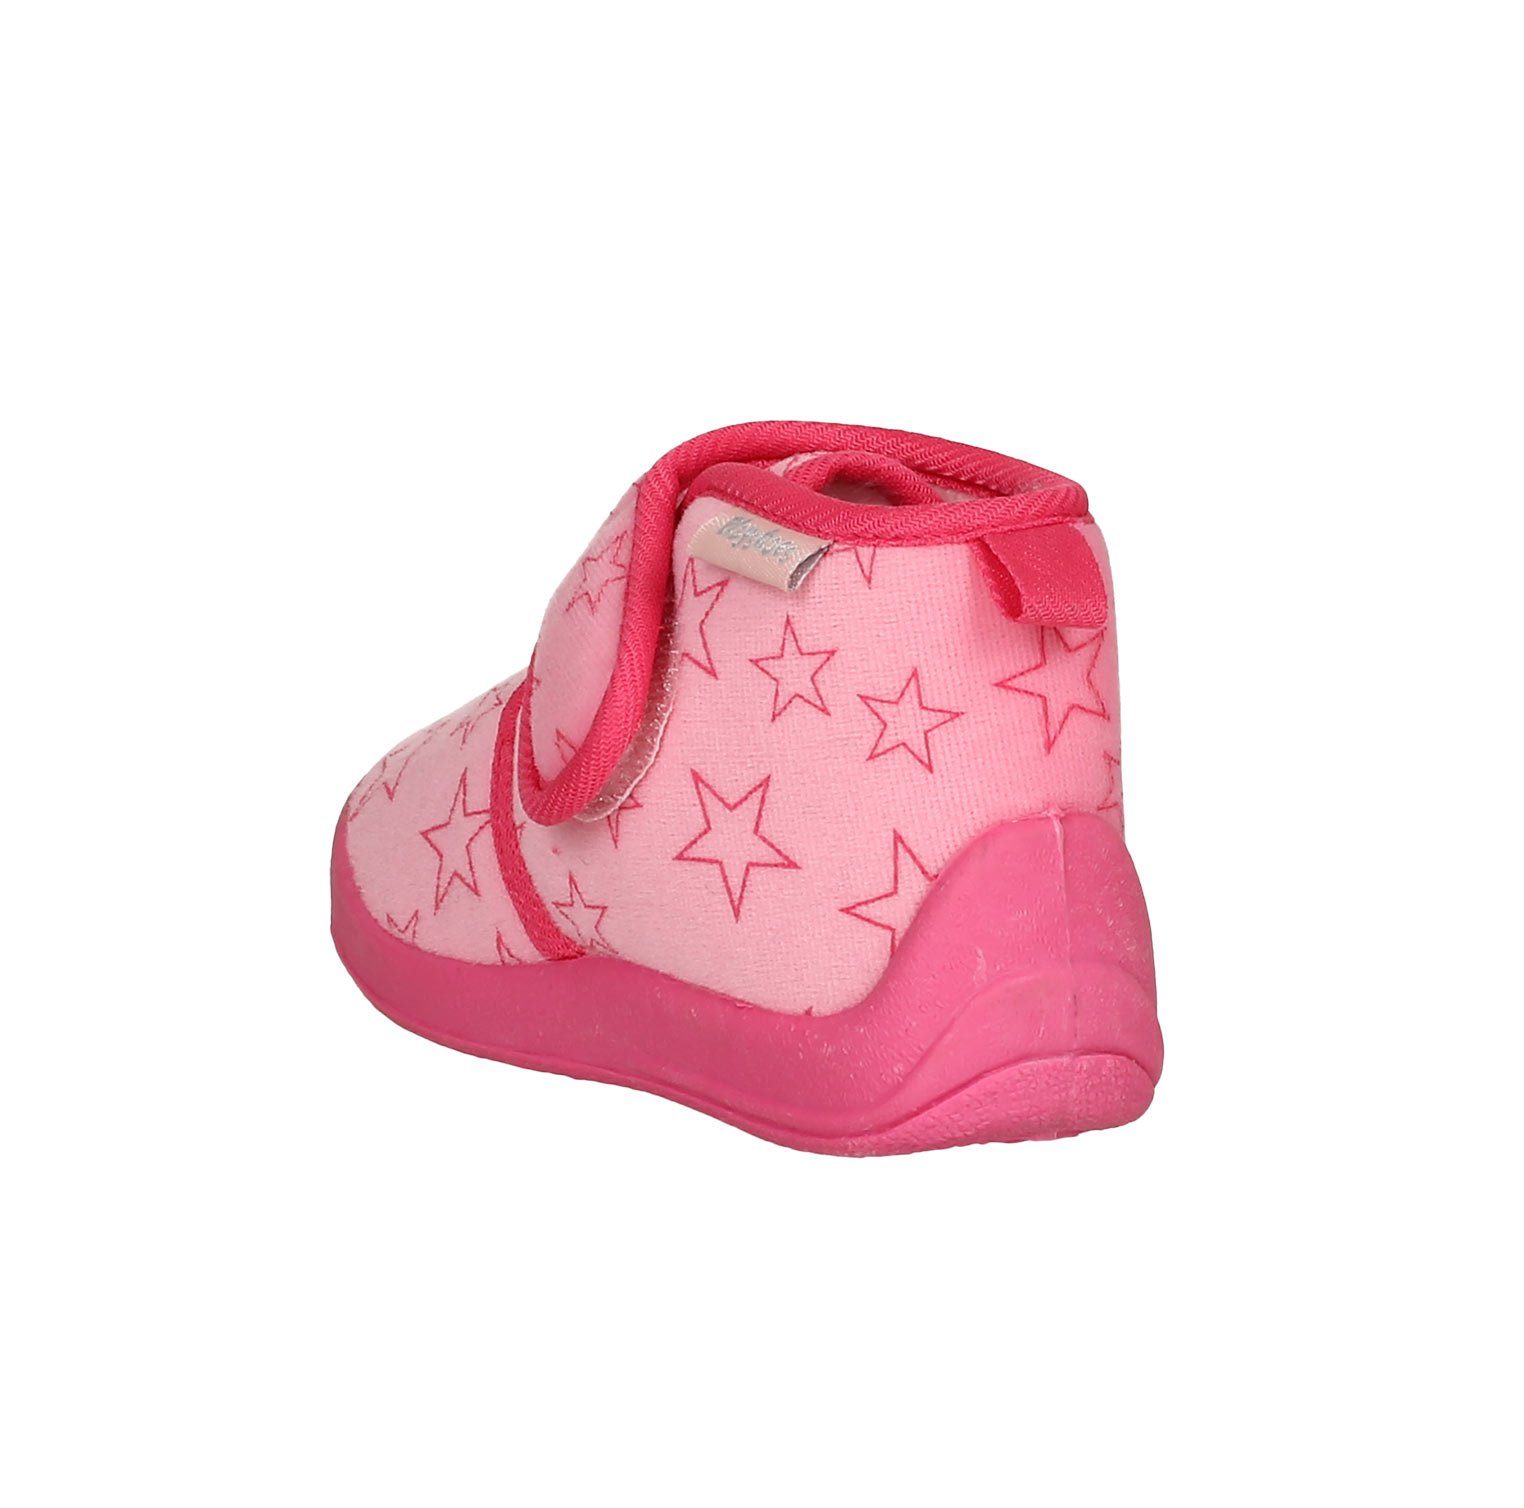 Rosa Playshoes Pastell Hausschuh Hausschuh